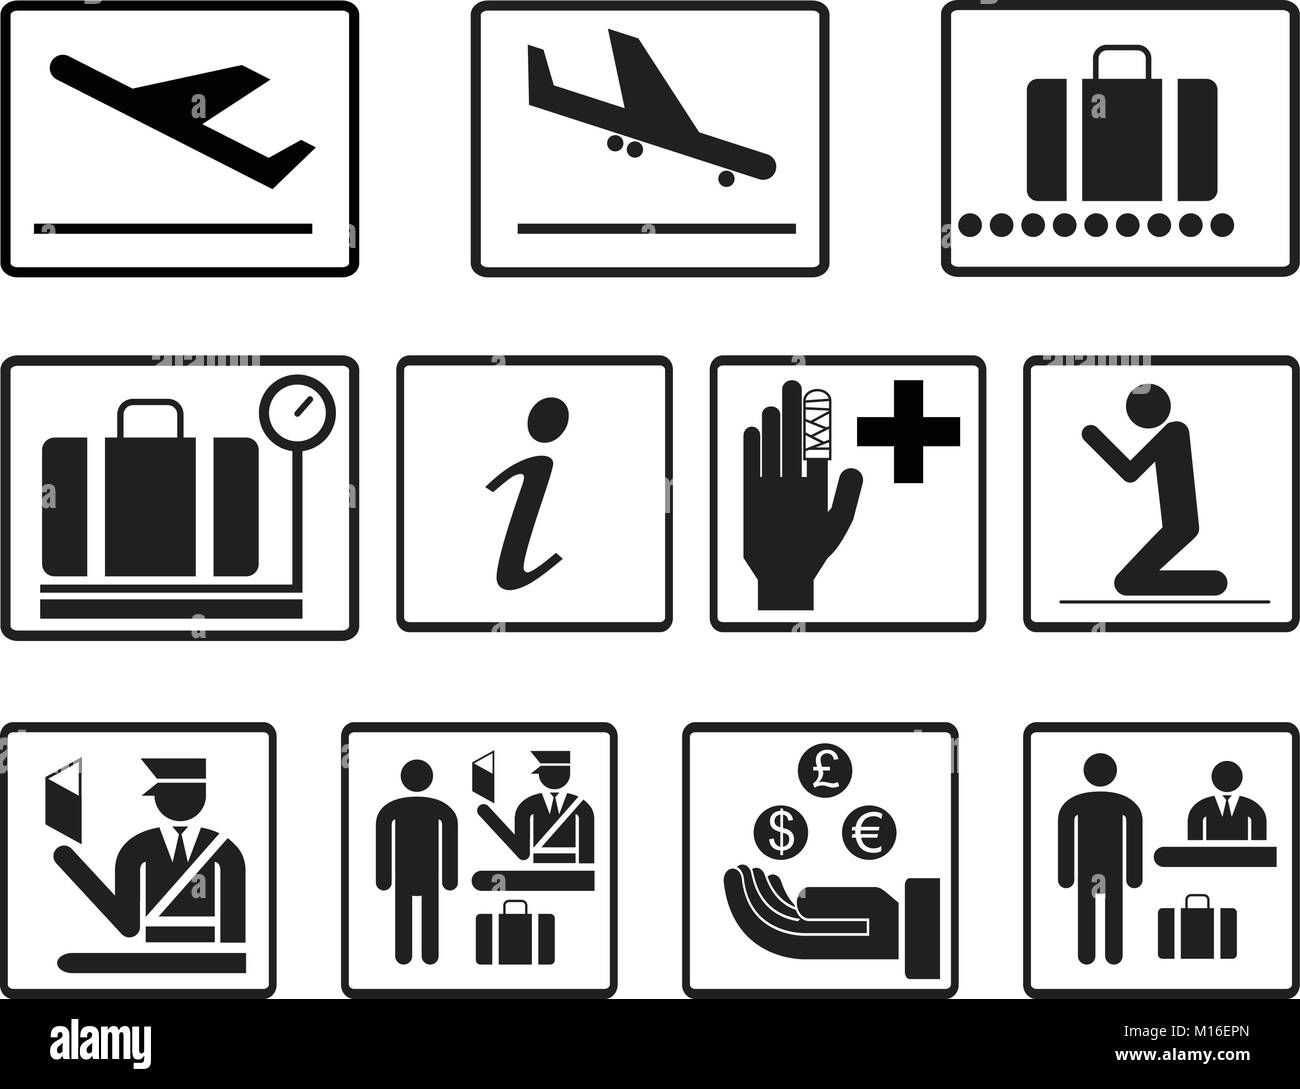 Simple airport 2d icons vector set. Universal airport icons to use for information , airline , departure , arrival , flight , gate , terminal , bag Stock Vector